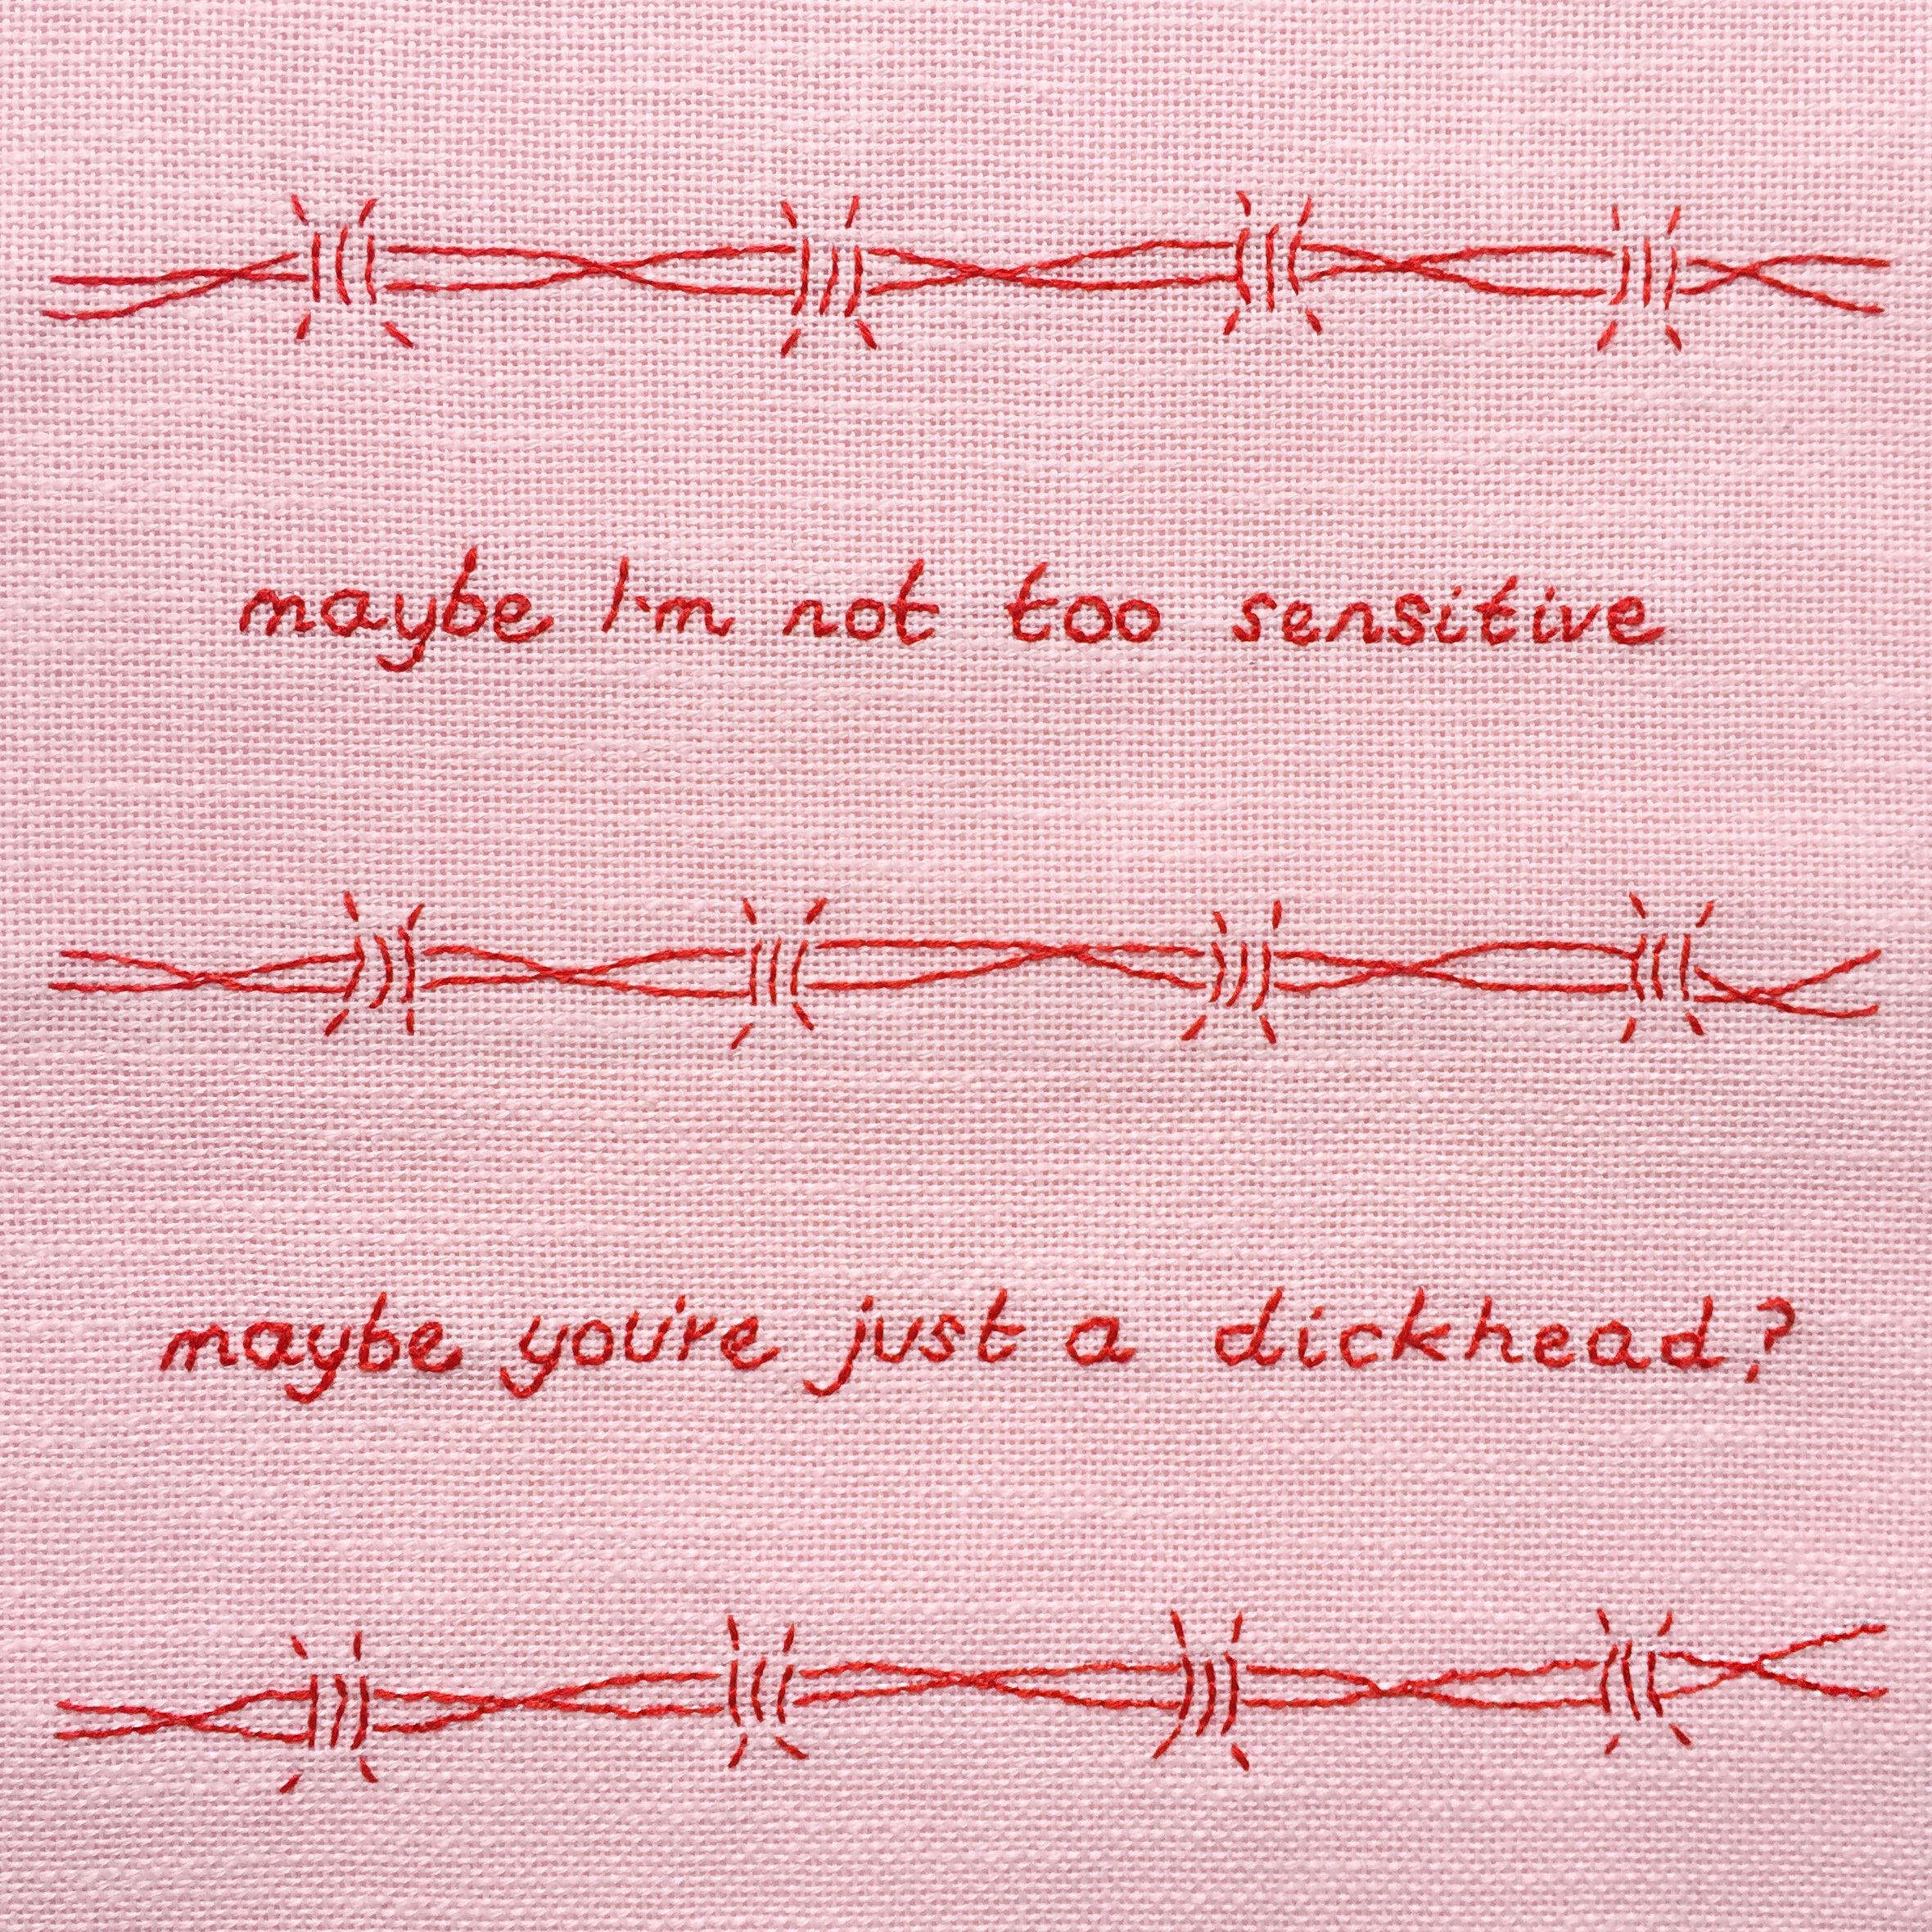 embroidered "maybe I'm not too sensitive, maybe you're just a dickhead?" satin on hoop, 2017, Sophie King